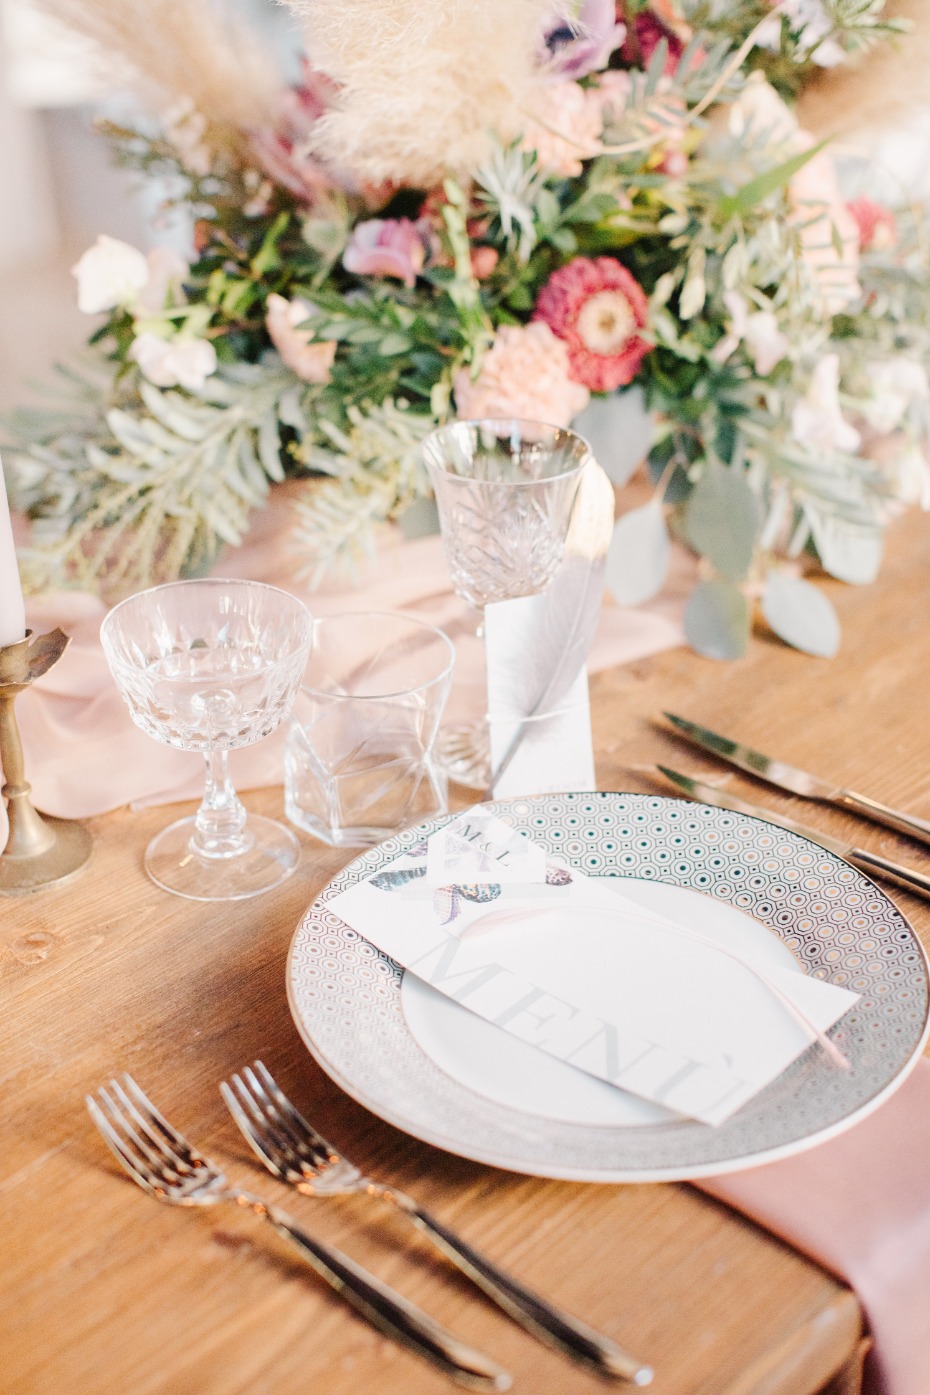 Clean and modern place setting